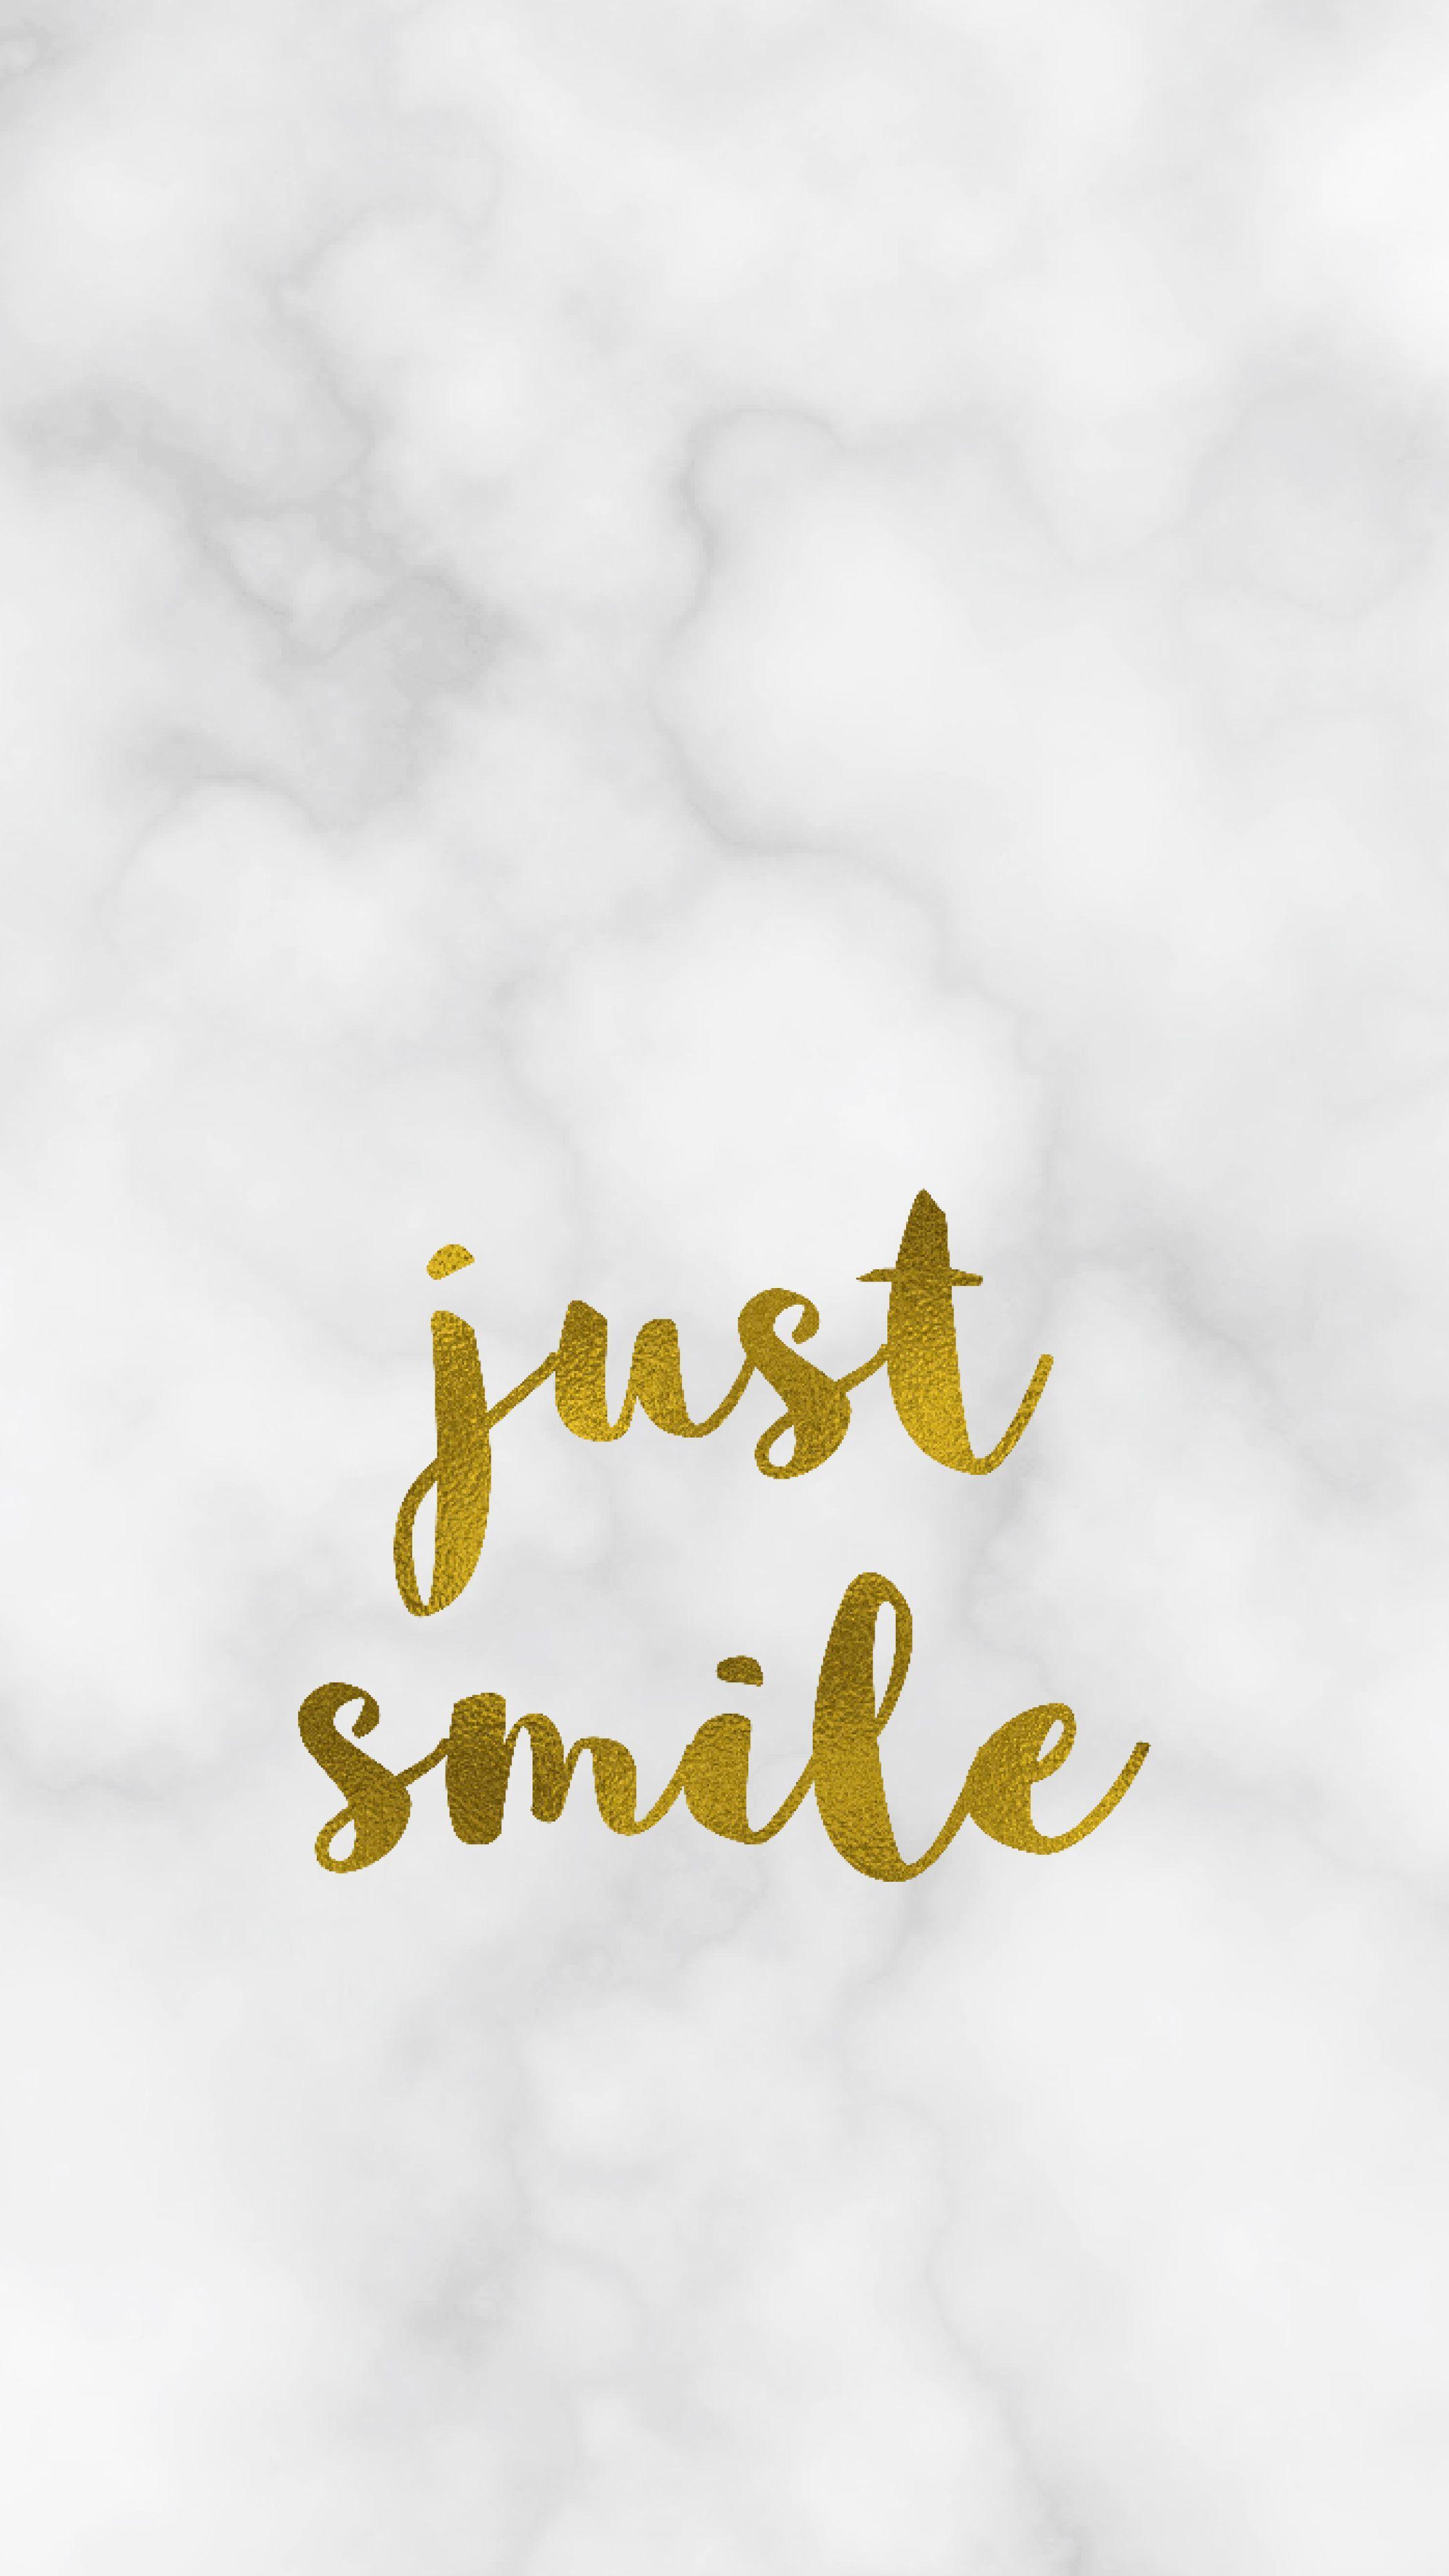 Just Smile Wallpapers - Top Free Just